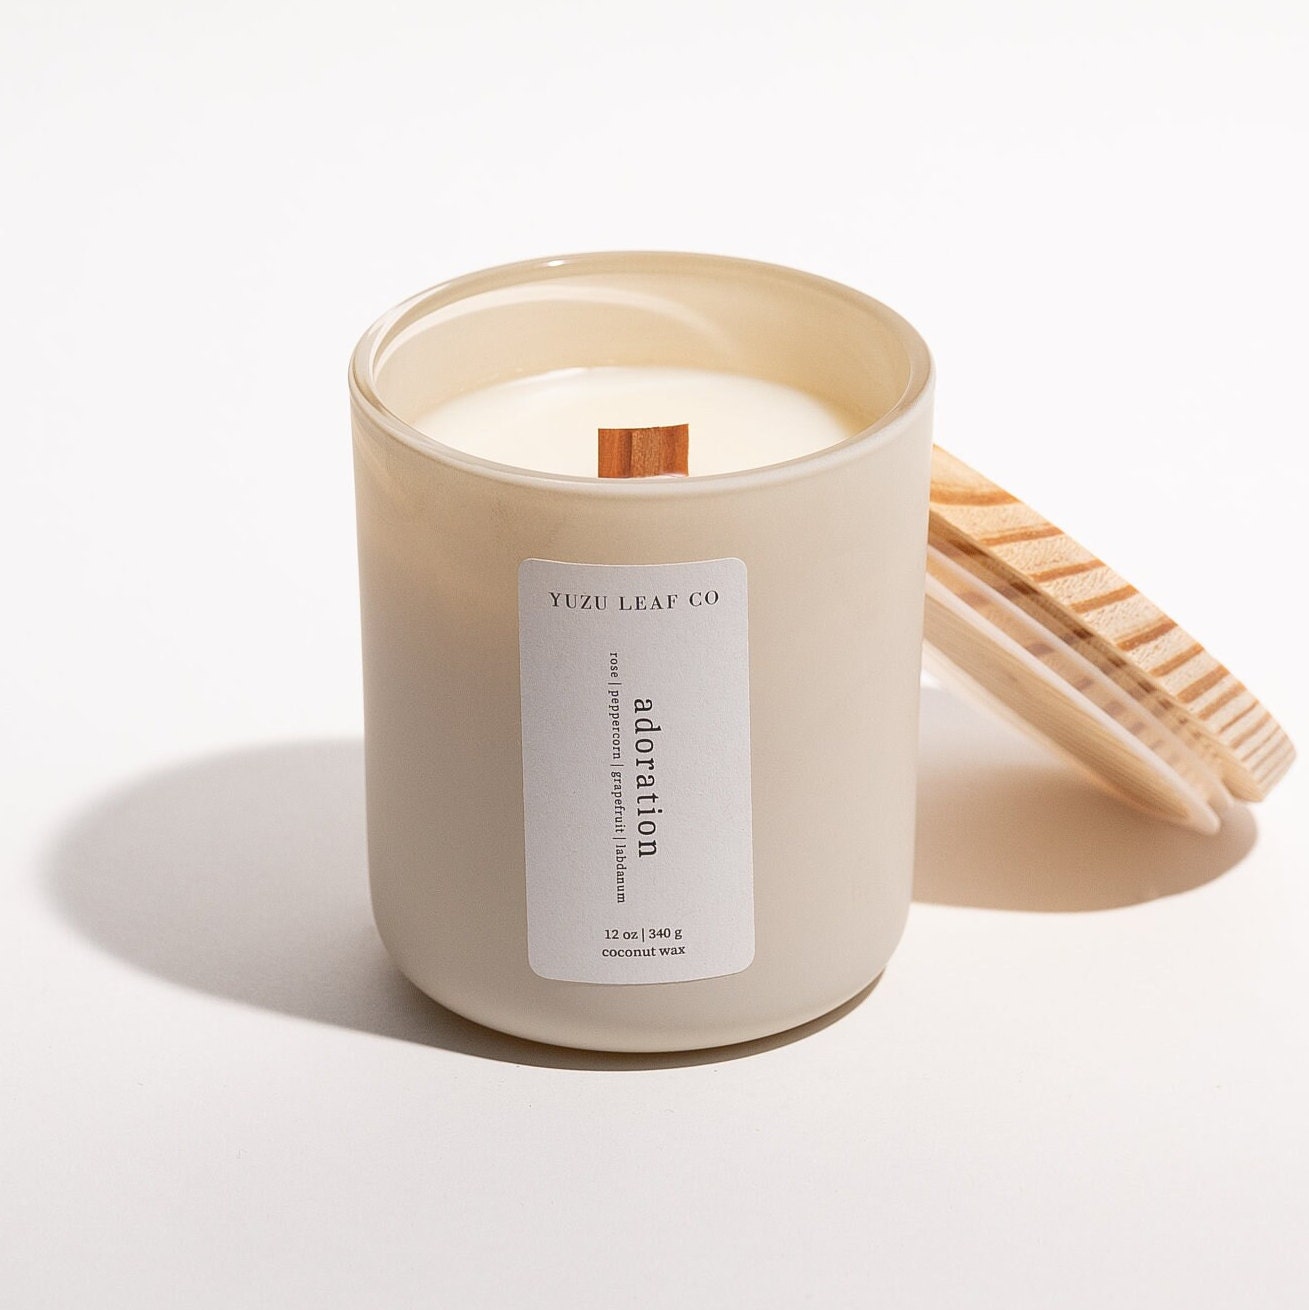 There is a large, cylindrical glass jar candle with a matte finish. The wick is made of wood and the label says "adoration: rose, peppercorn, grapefruit, labdanum." The wooden lid is leaning against the glass jar.